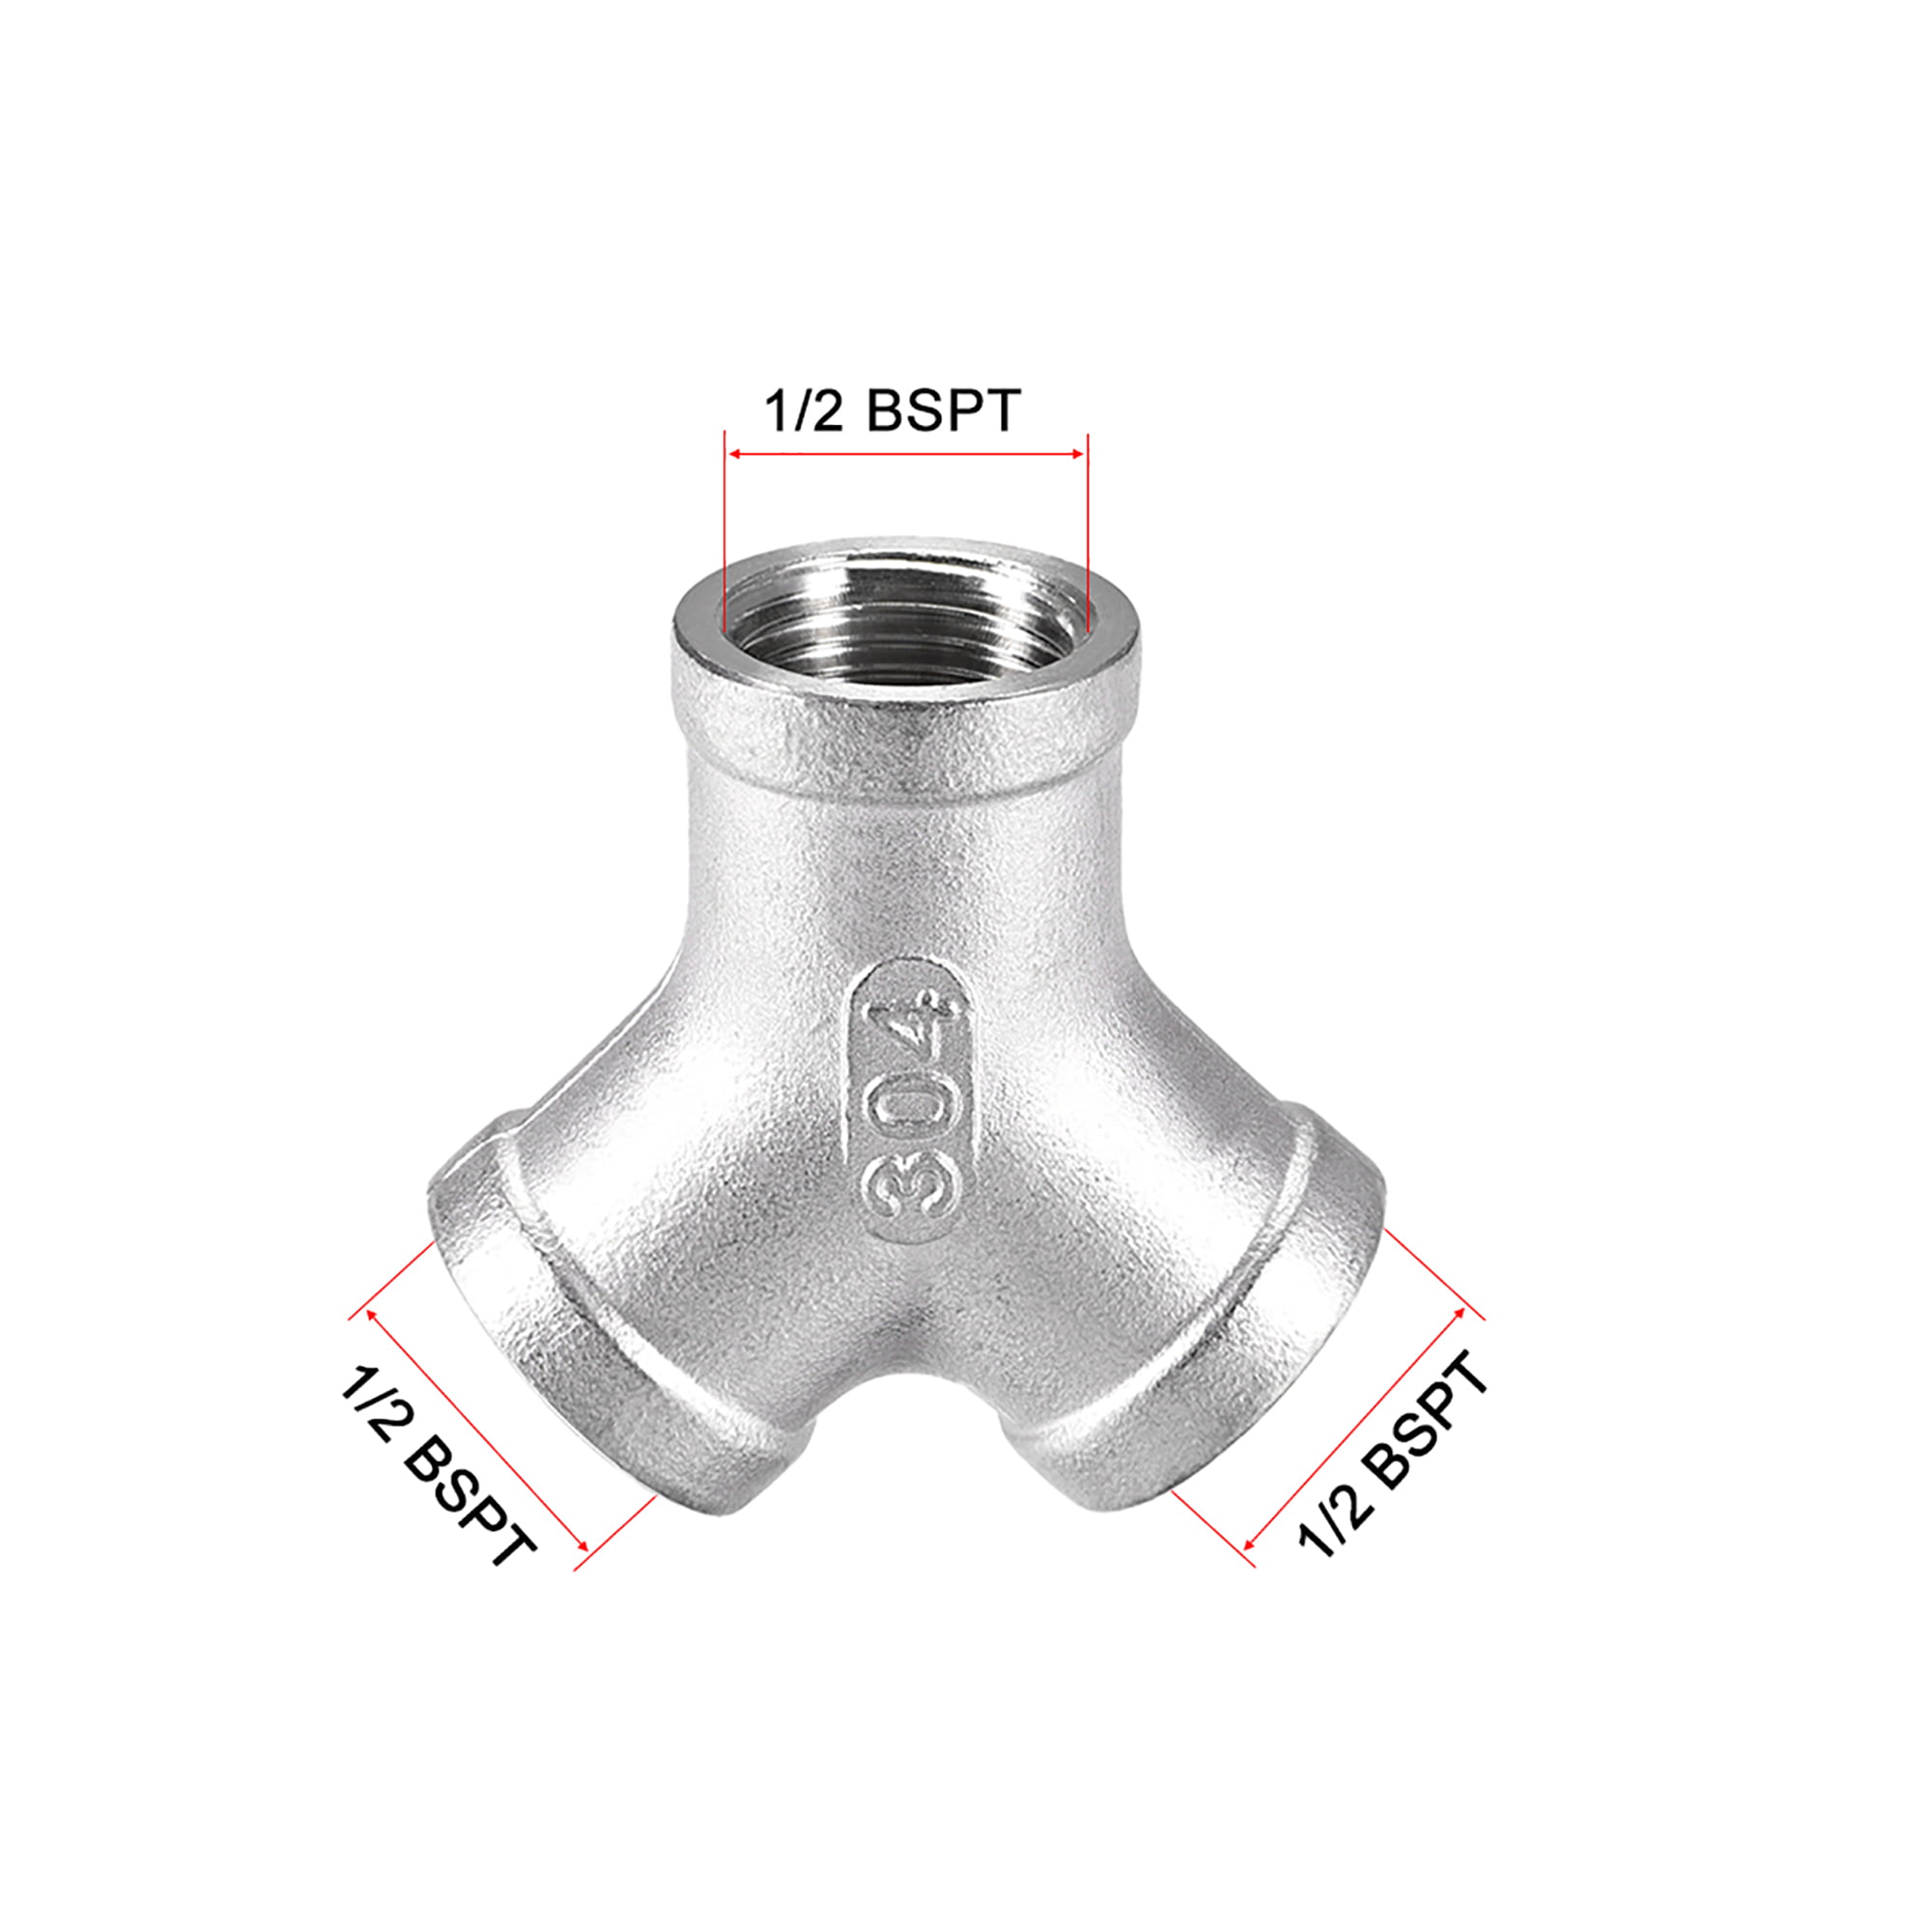 1/2” BSPT Female Threaded Union Stainless Steel 304 Cast Pipe Fitting Class 150 